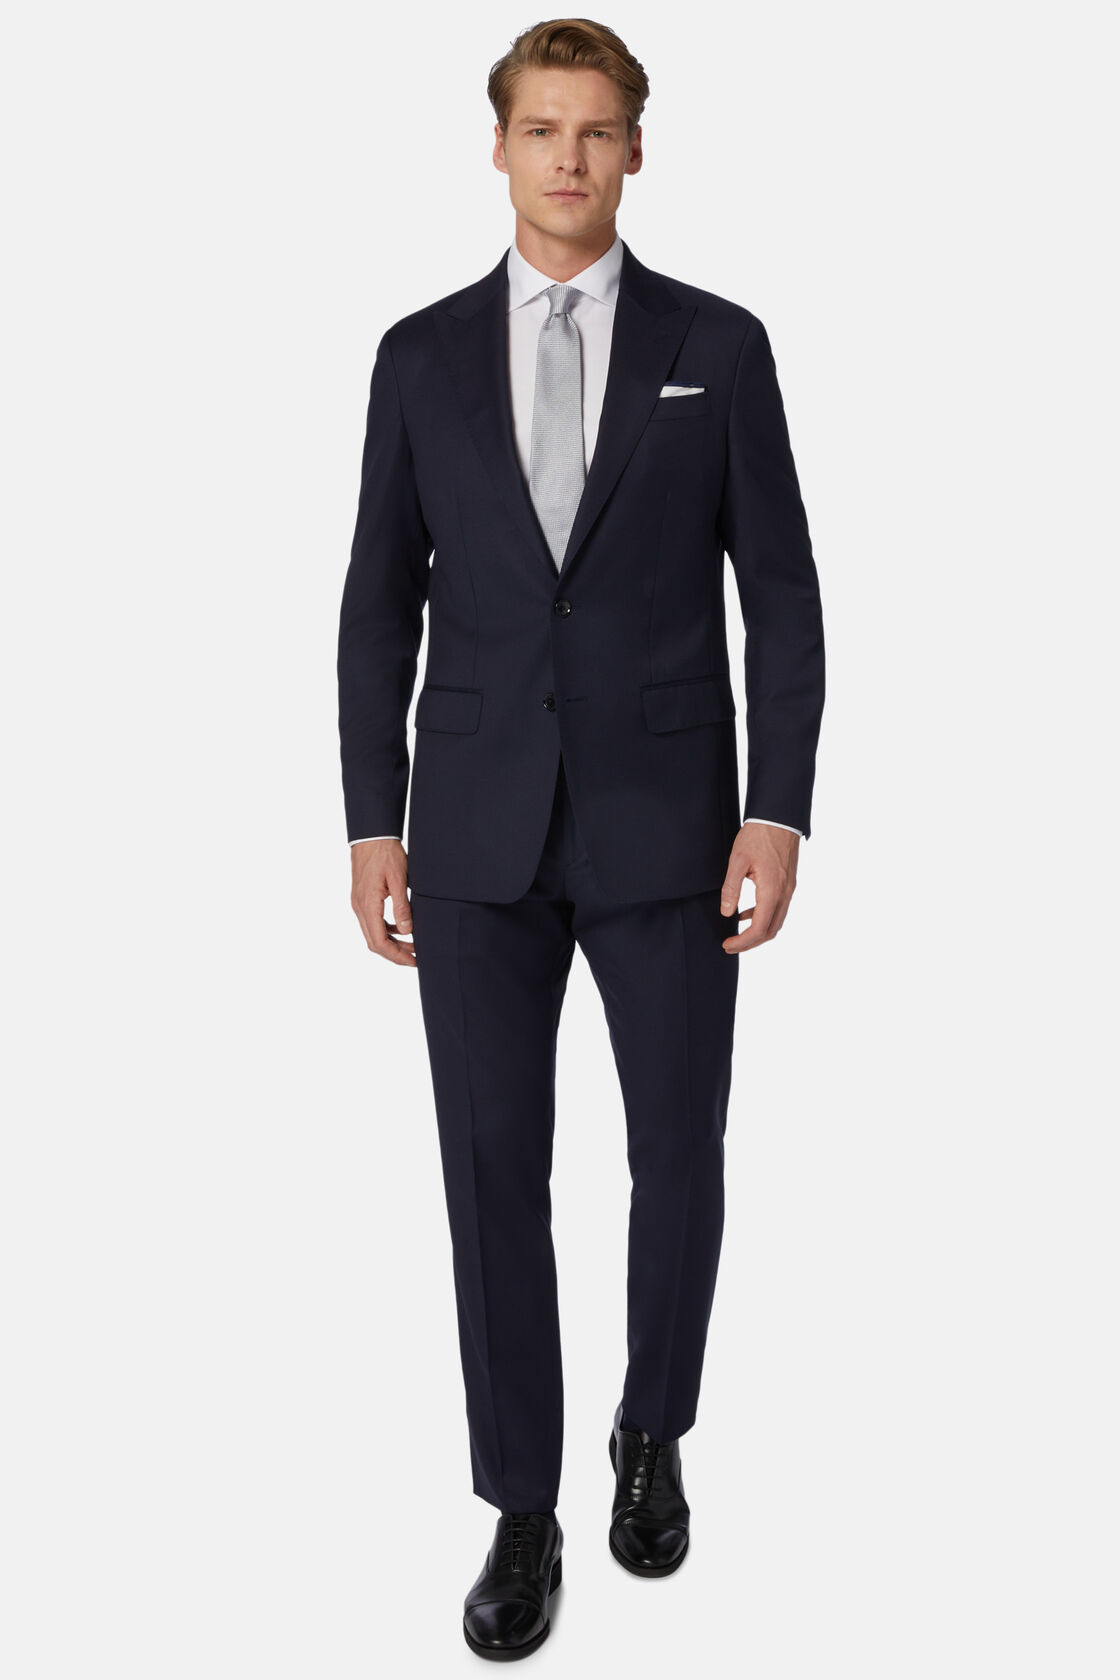 Navy Structured Stretch Wool Suit, Navy blue, hi-res